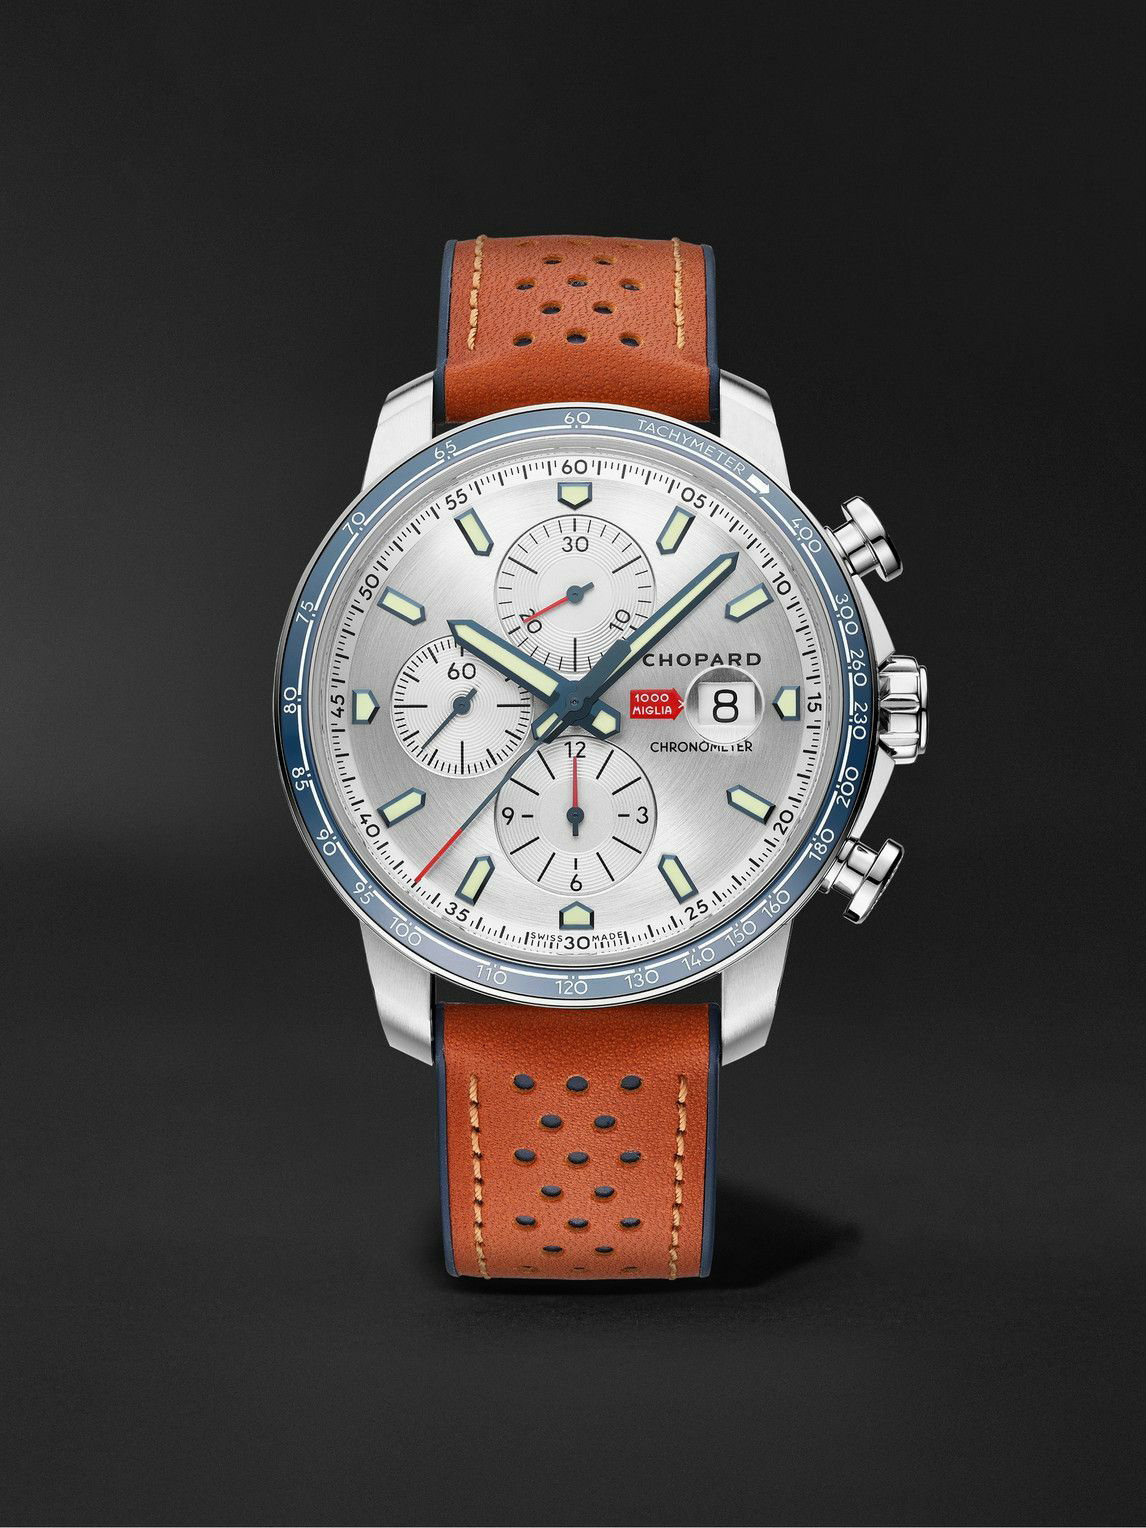 Mille Miglia GTS Azzurro Chrono Automatic Limited Edition 44mm Stainless  Steel and Leather Watch, Ref. No. 168571-3007